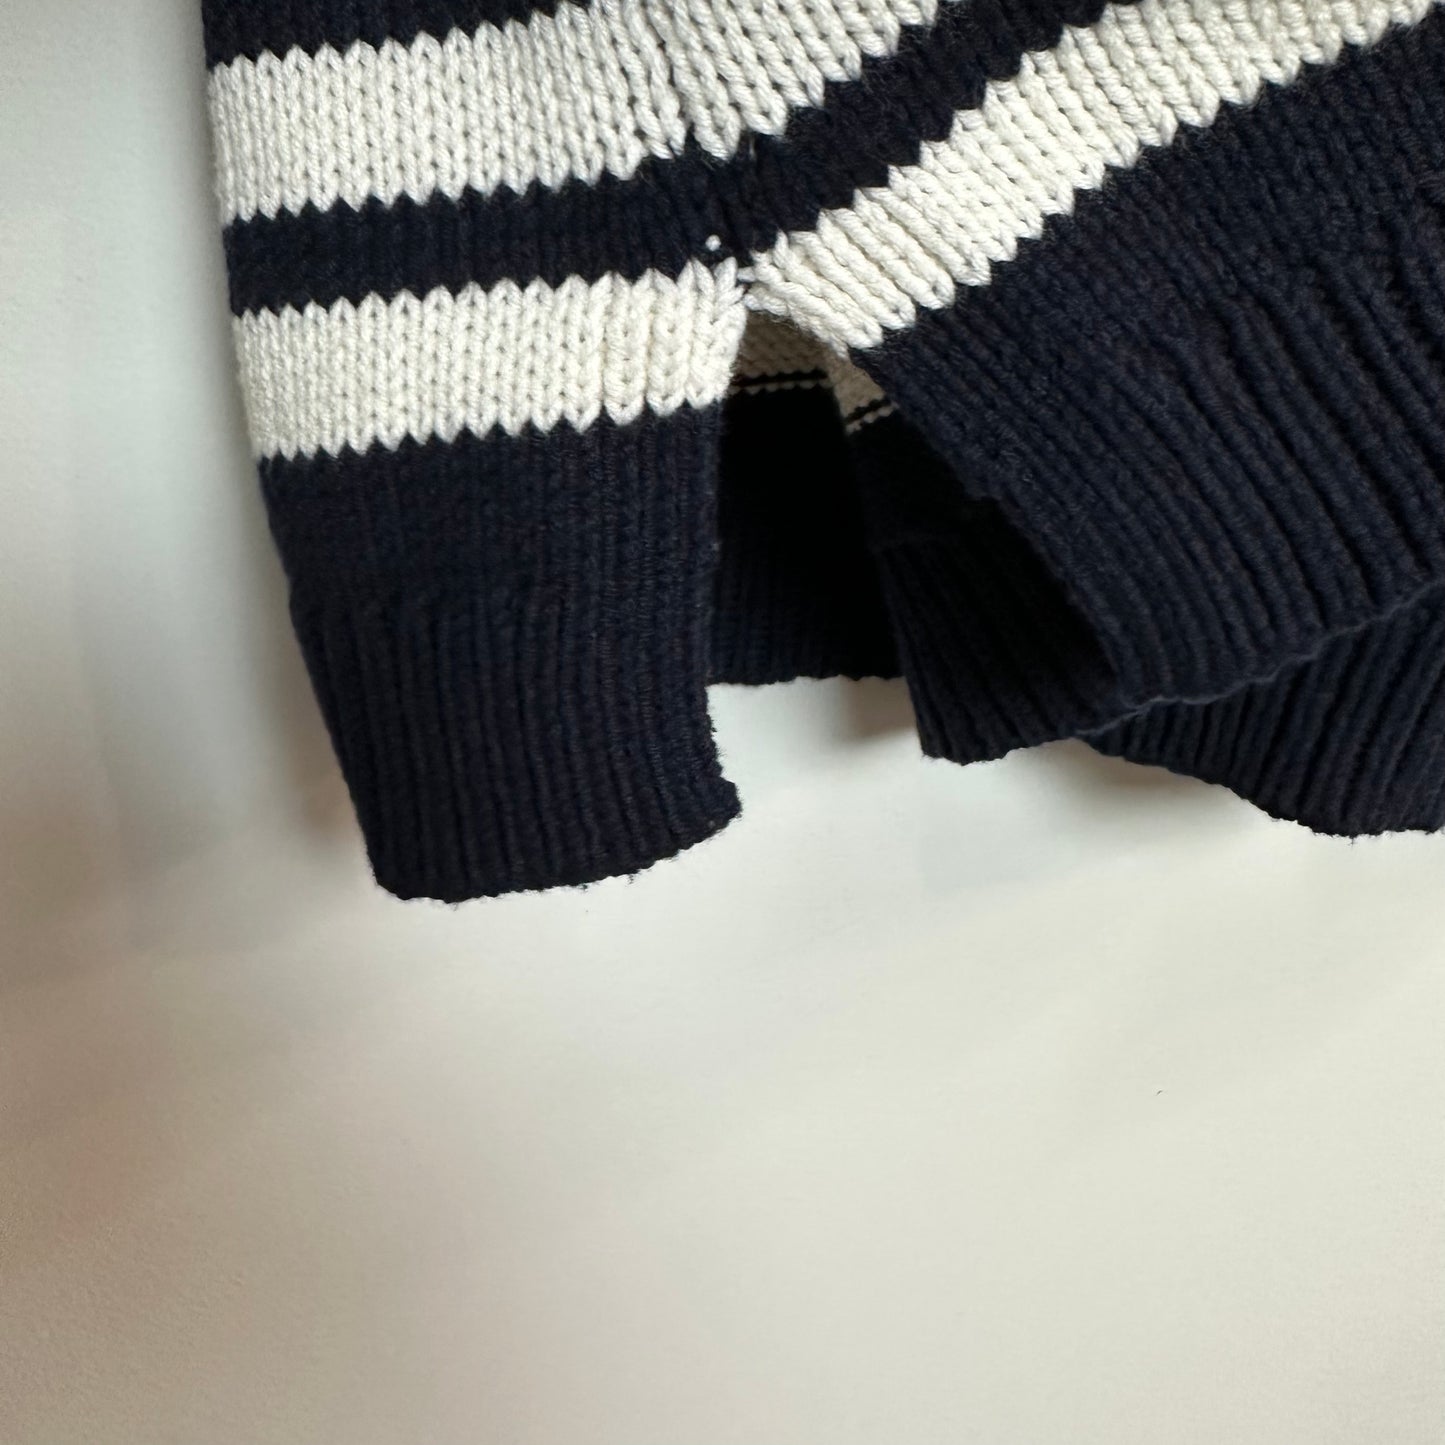 Talbots Fair Isle Navy and White Sweater Turtleneck Chunky Knit Small